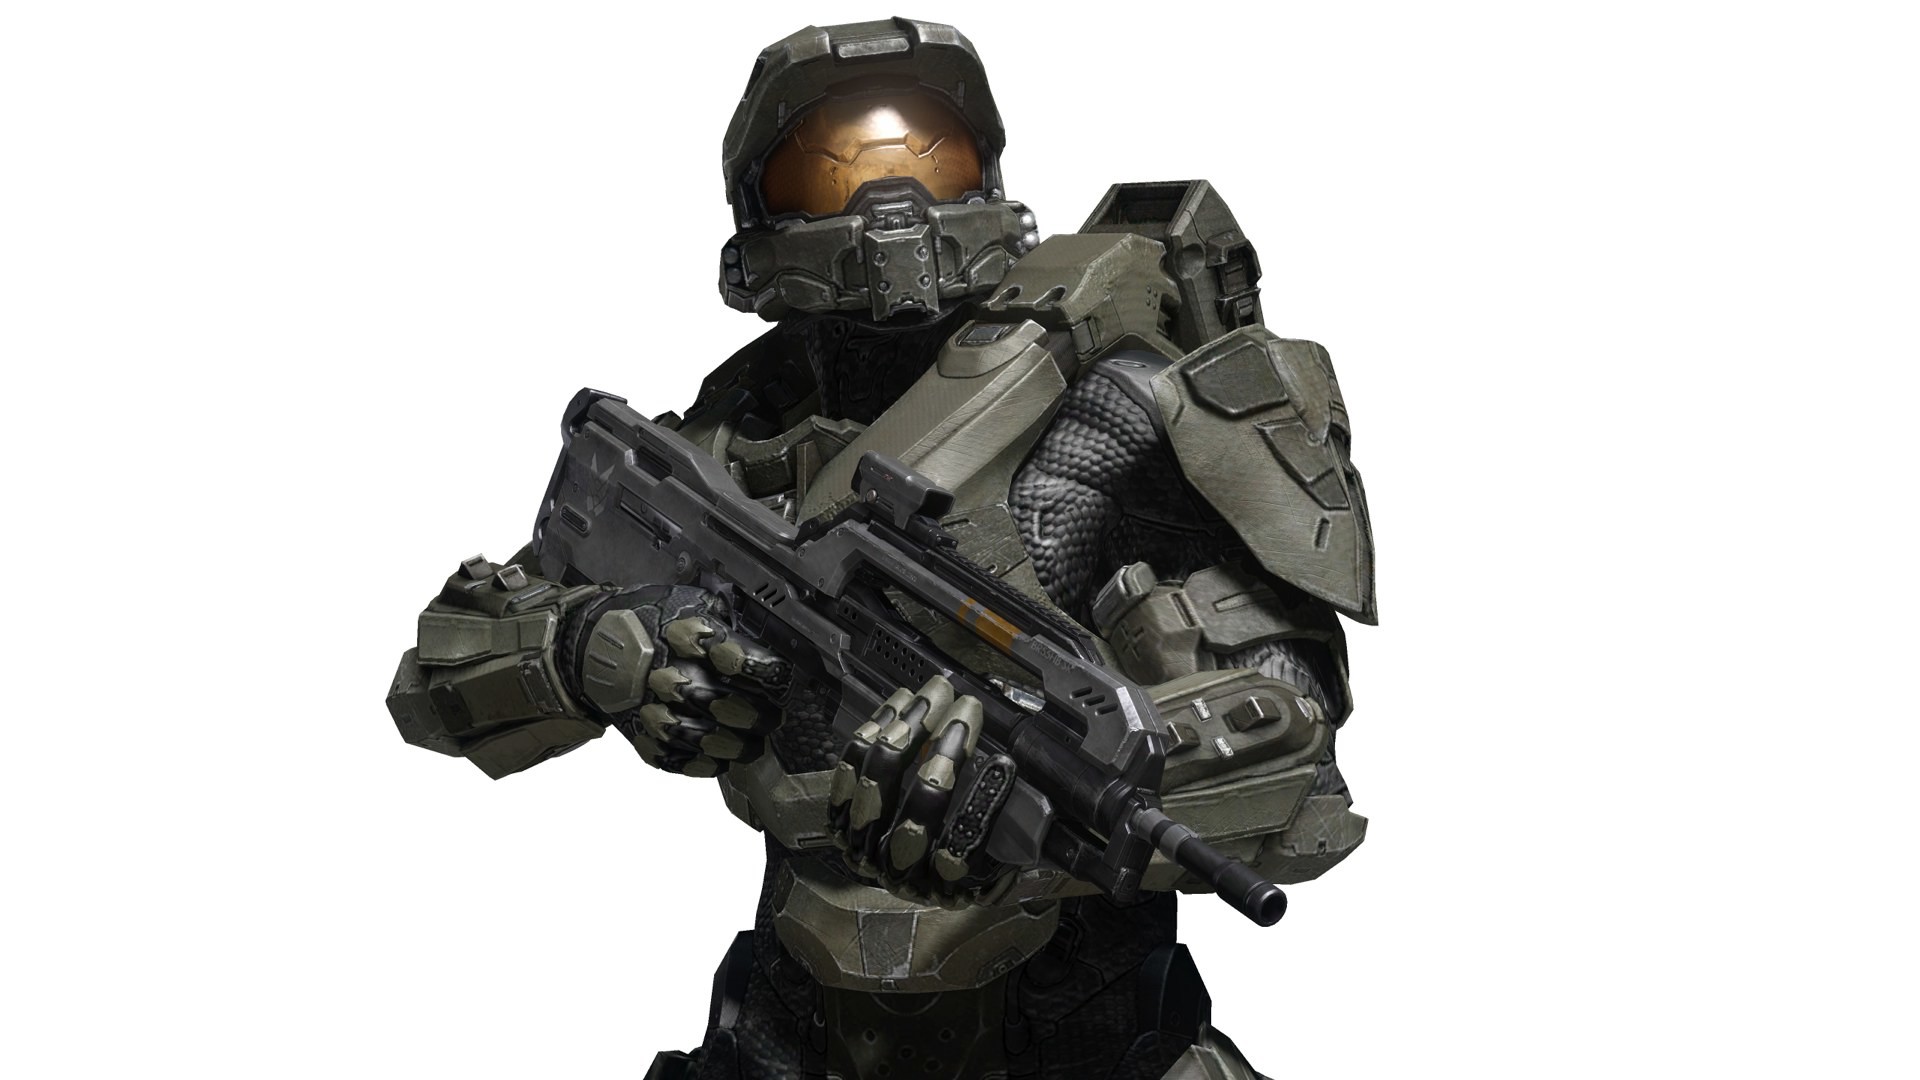 1920x1080 Halo images Halo 4 Master Chief HD wallpaper and background photos